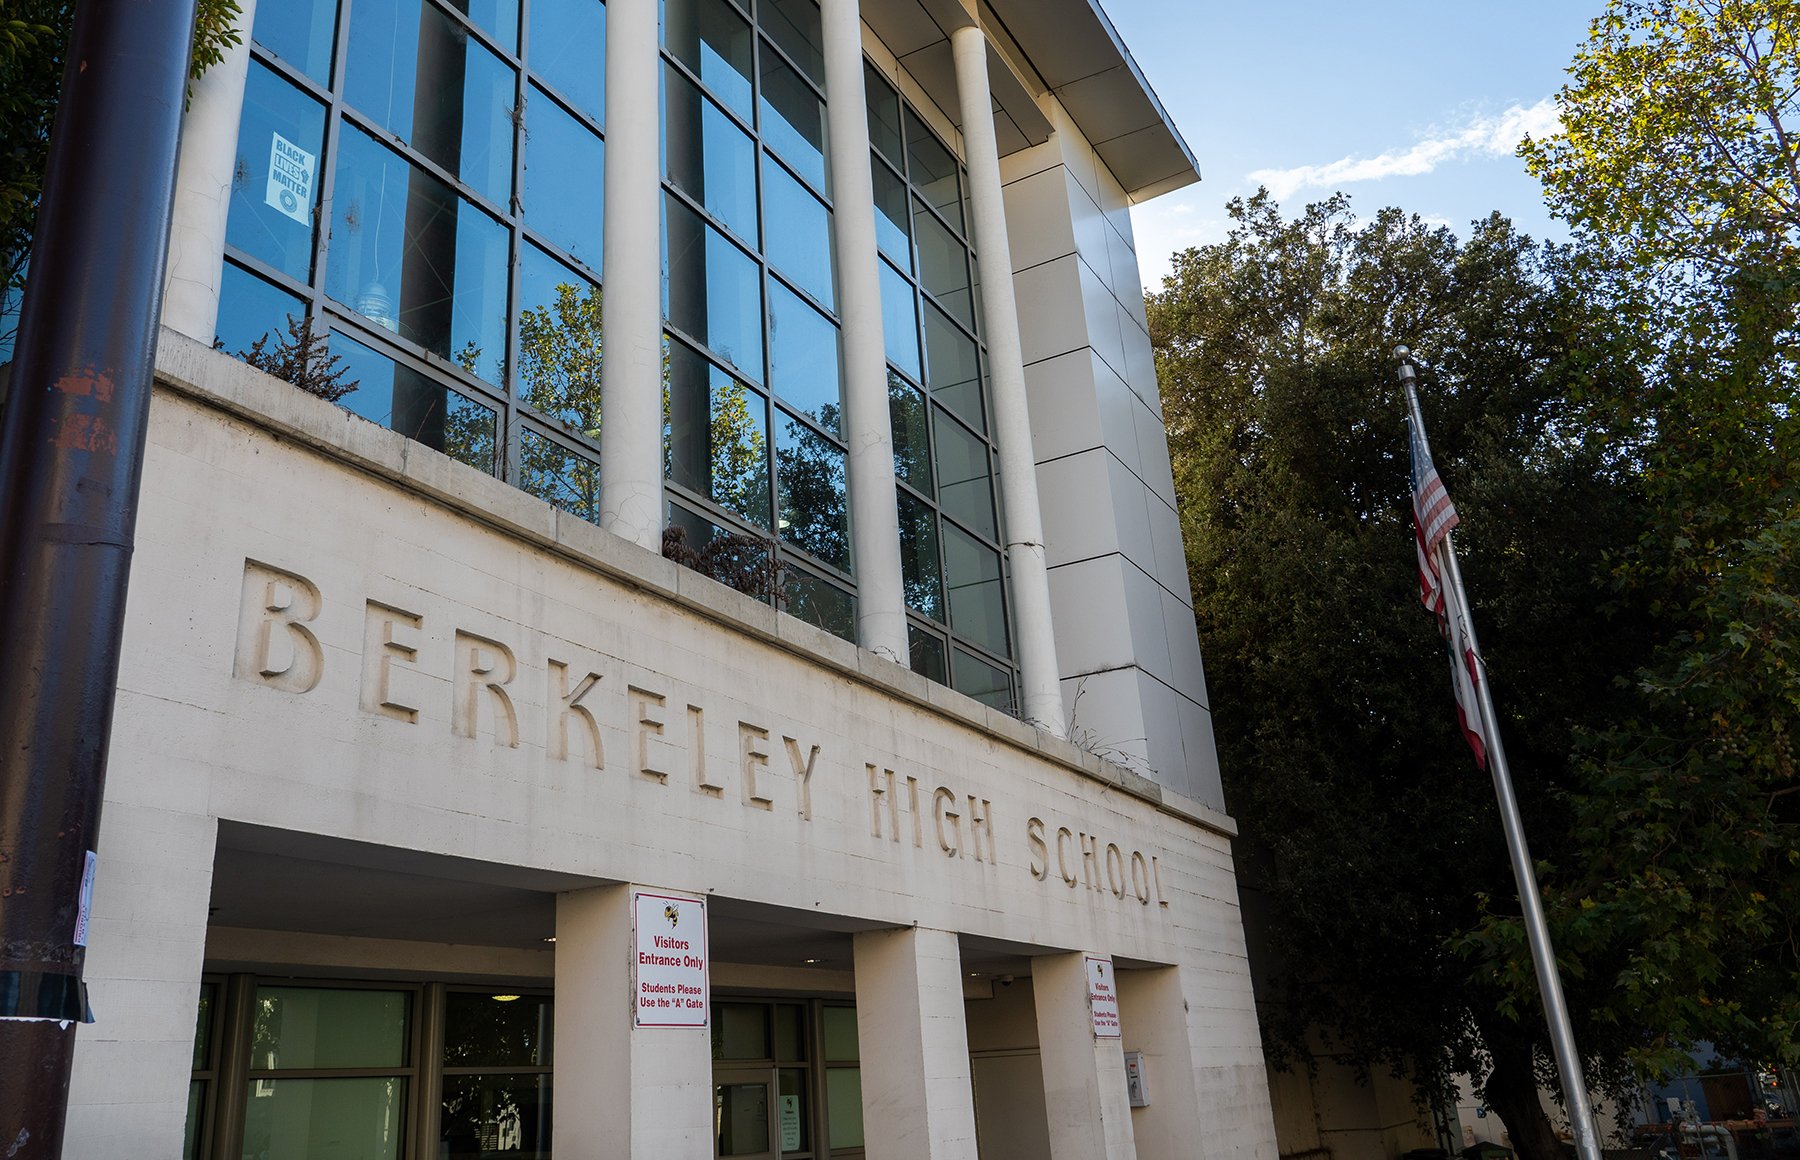 Berkeley Unified School District passes $65K climate literacy resolution